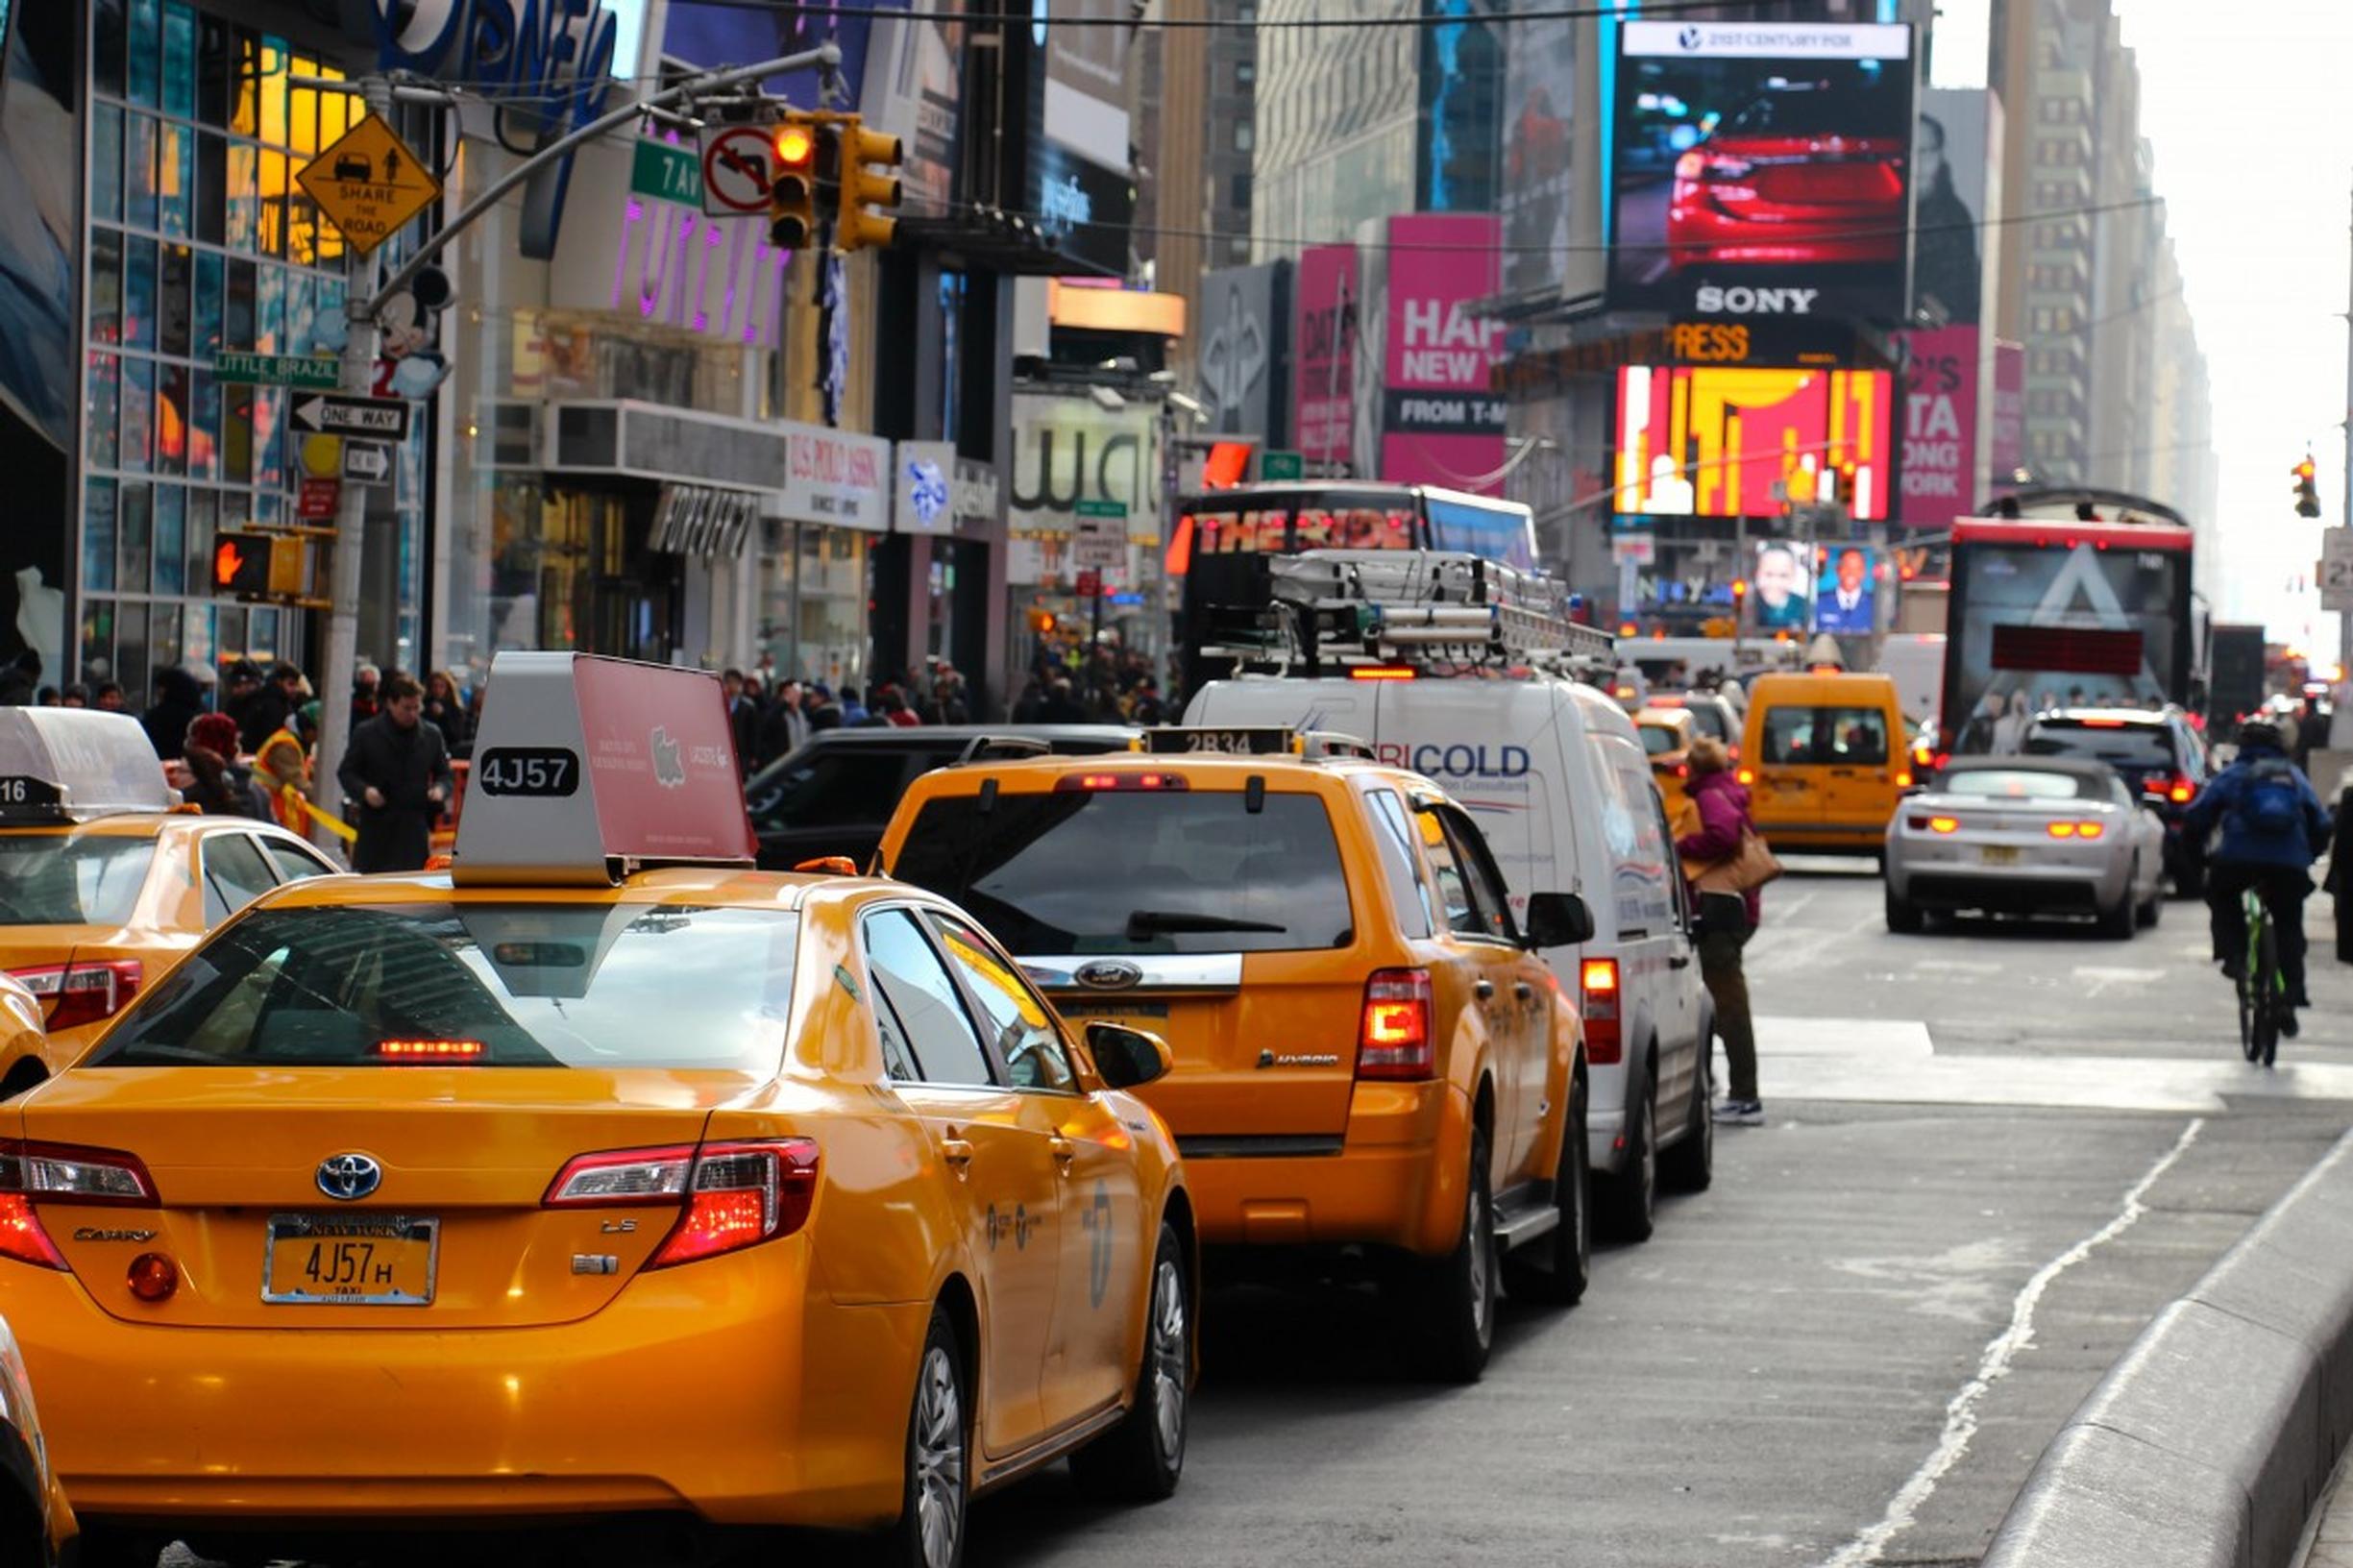 Yellow cabs in NYC have always charged 50-cents per trip on every fare, sending $600 million to the MTA. What should Uber and Lyft pay?